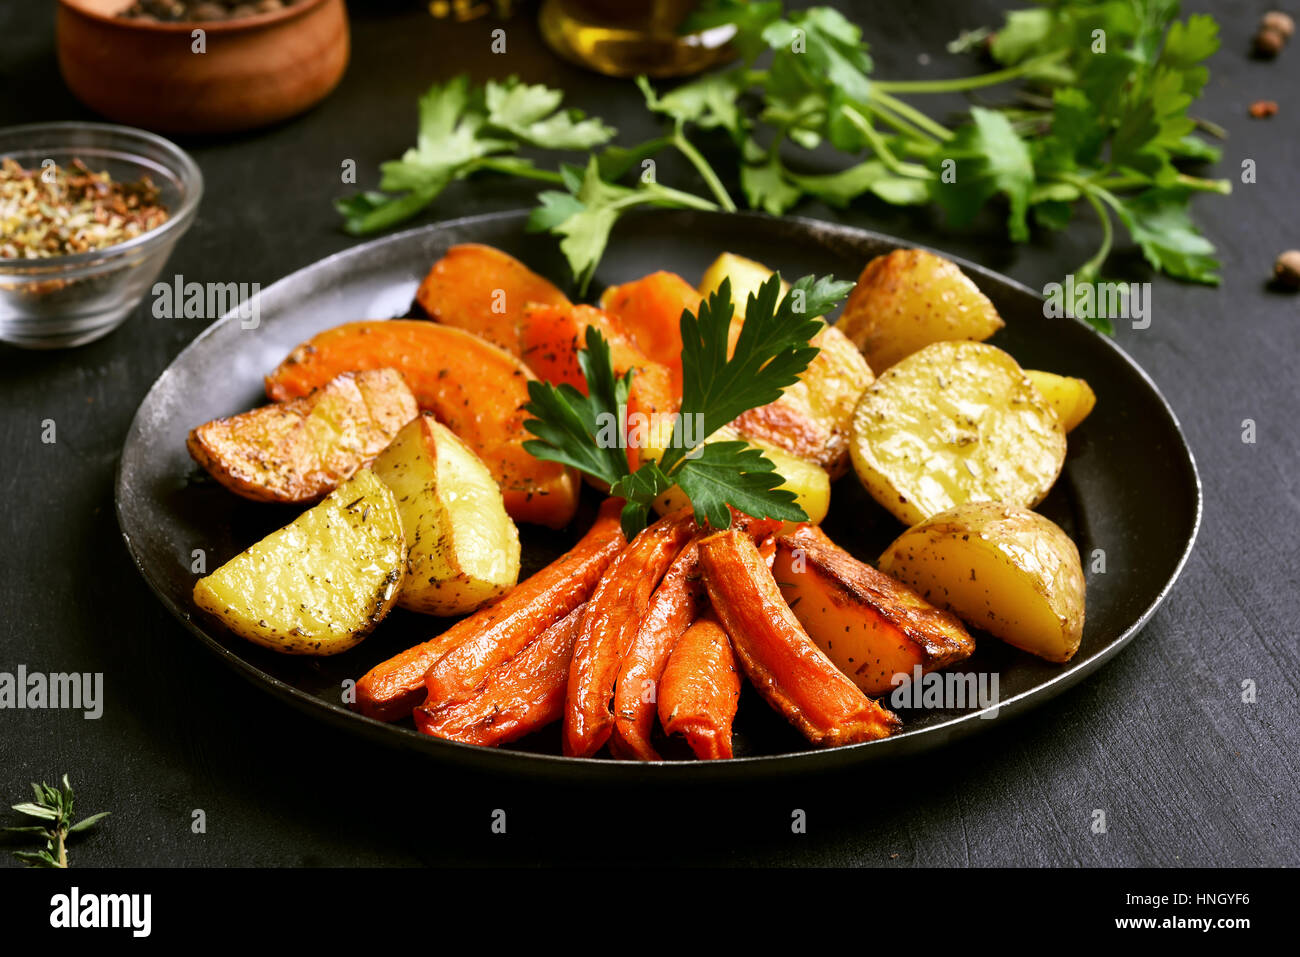 Roasted vegetables in frying pan, close up view Stock Photo